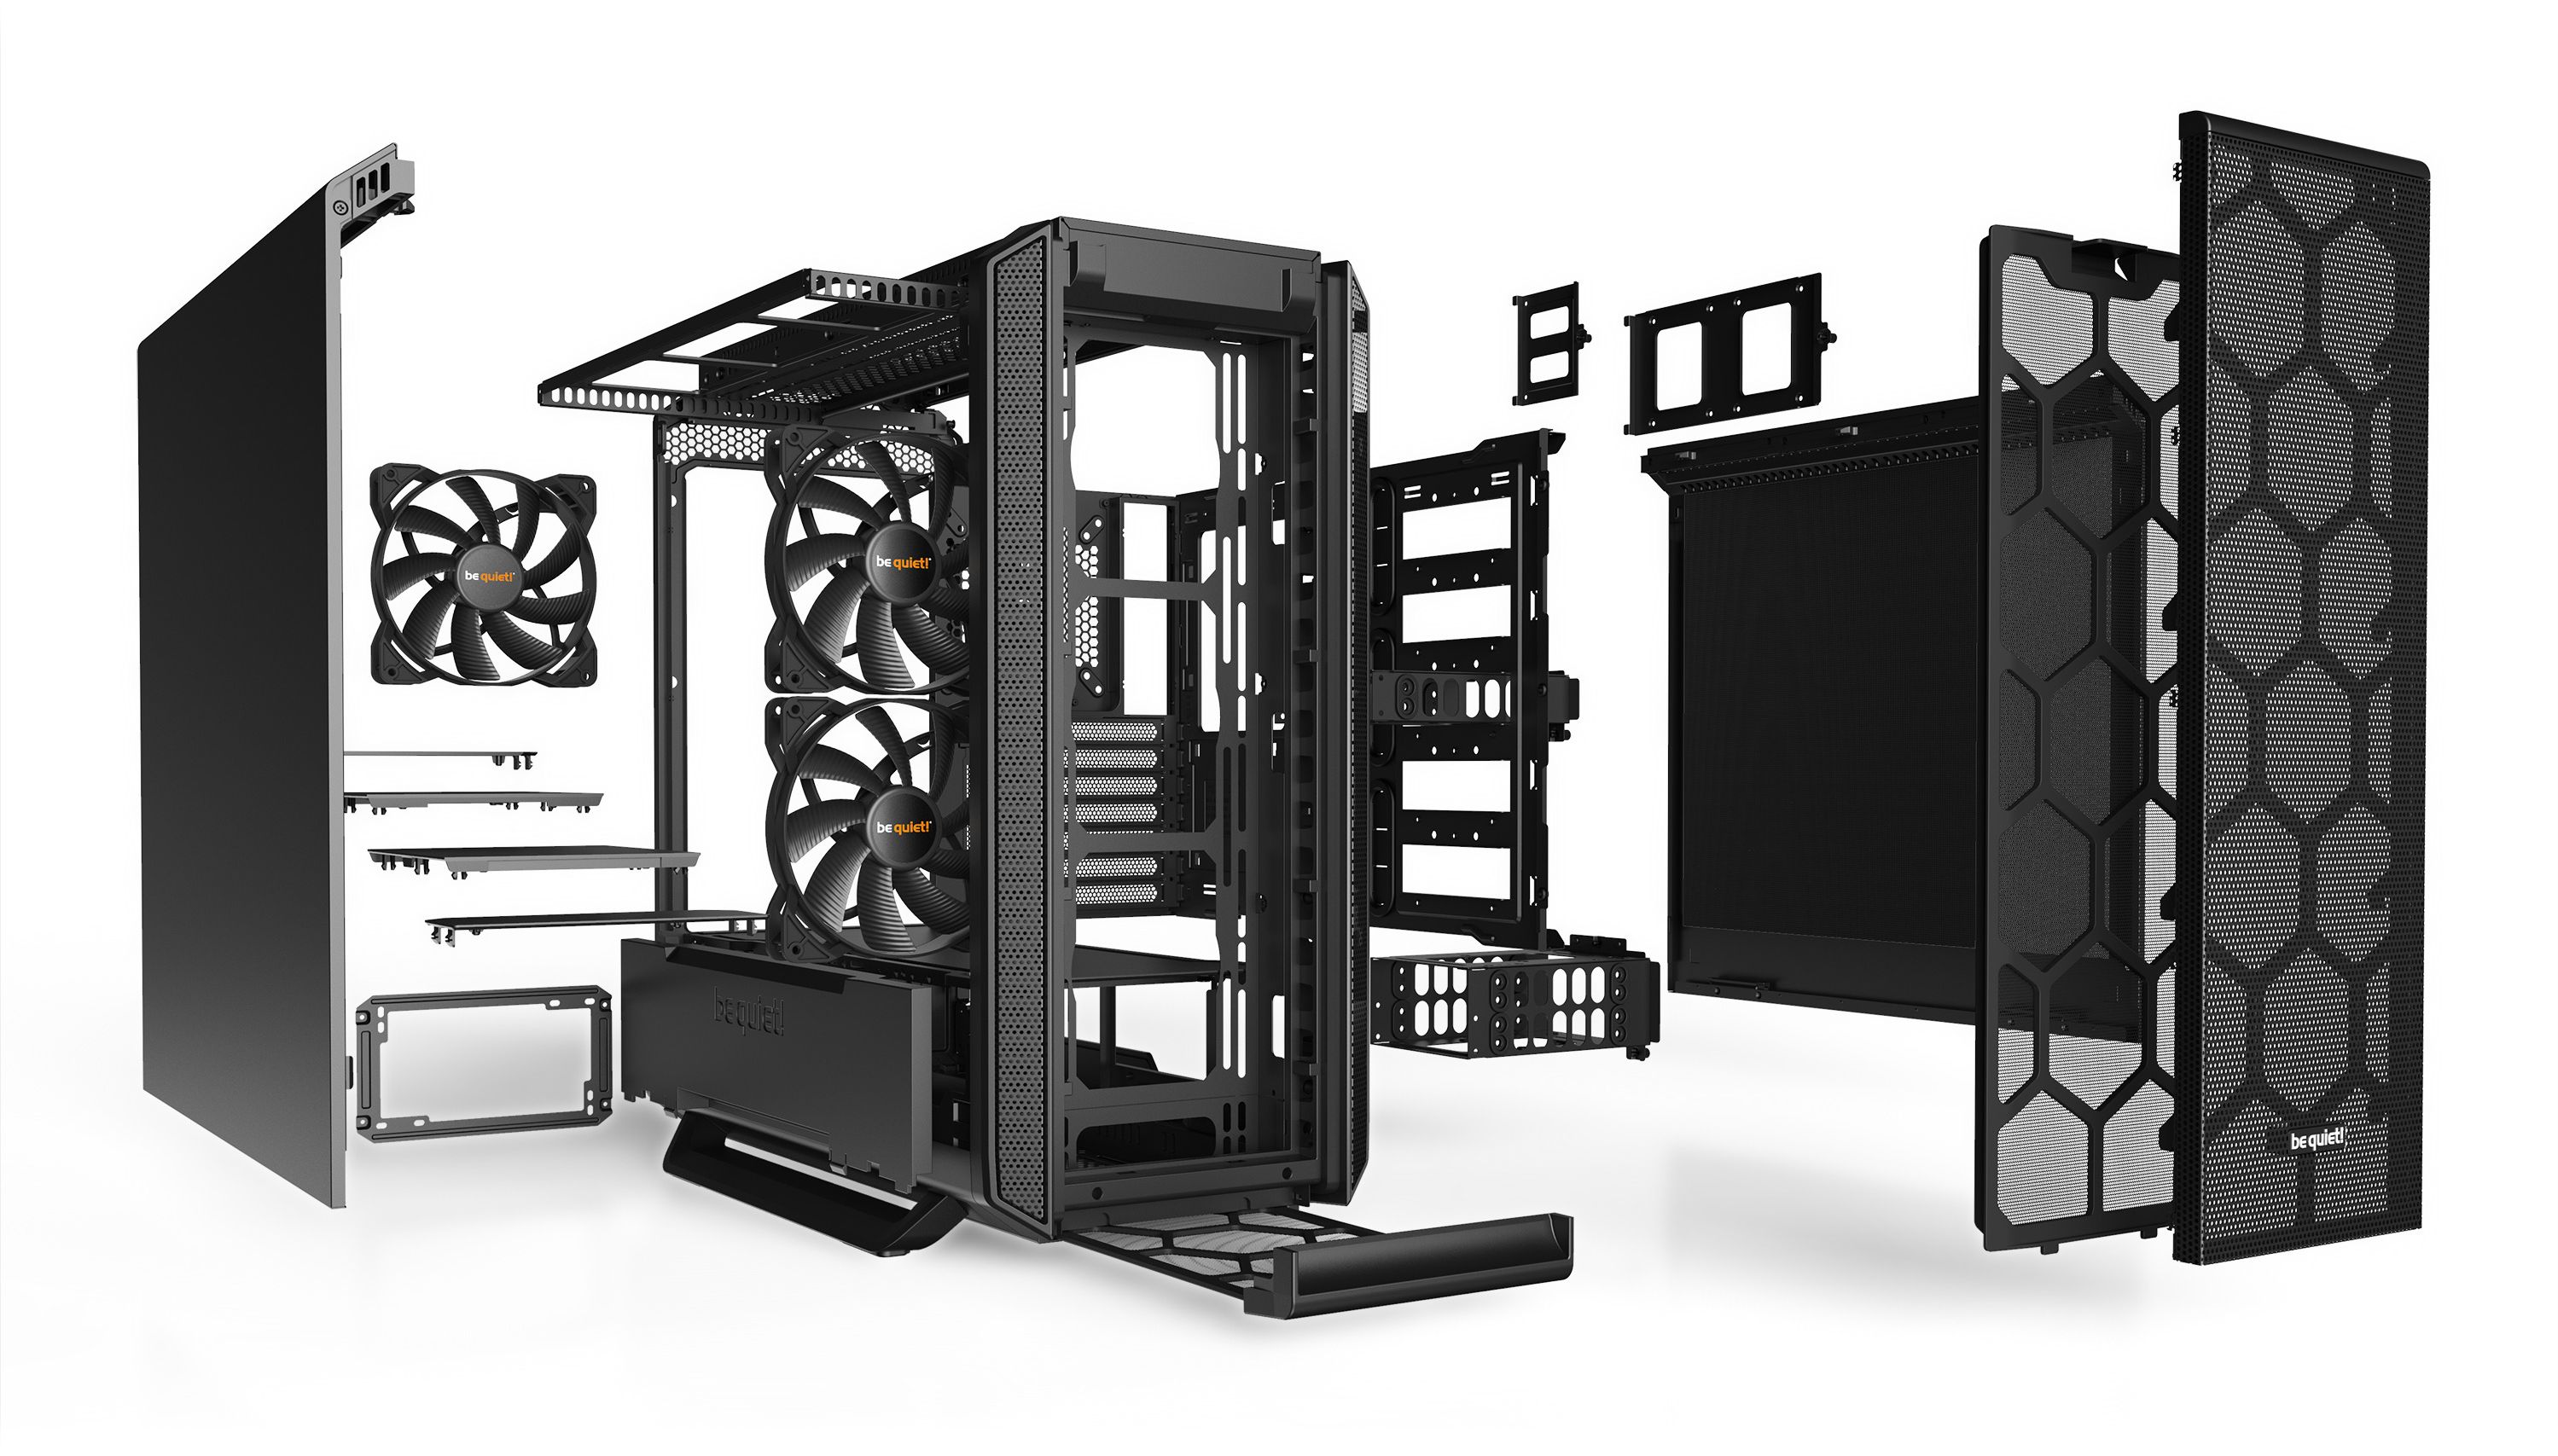  be quiet! Silent Base 601 ATX Midi Tower PC Case, 2  Pre-Installed Pure Wings 2 140mm Fans, 10mm Extra Thick Insulated mats, Black